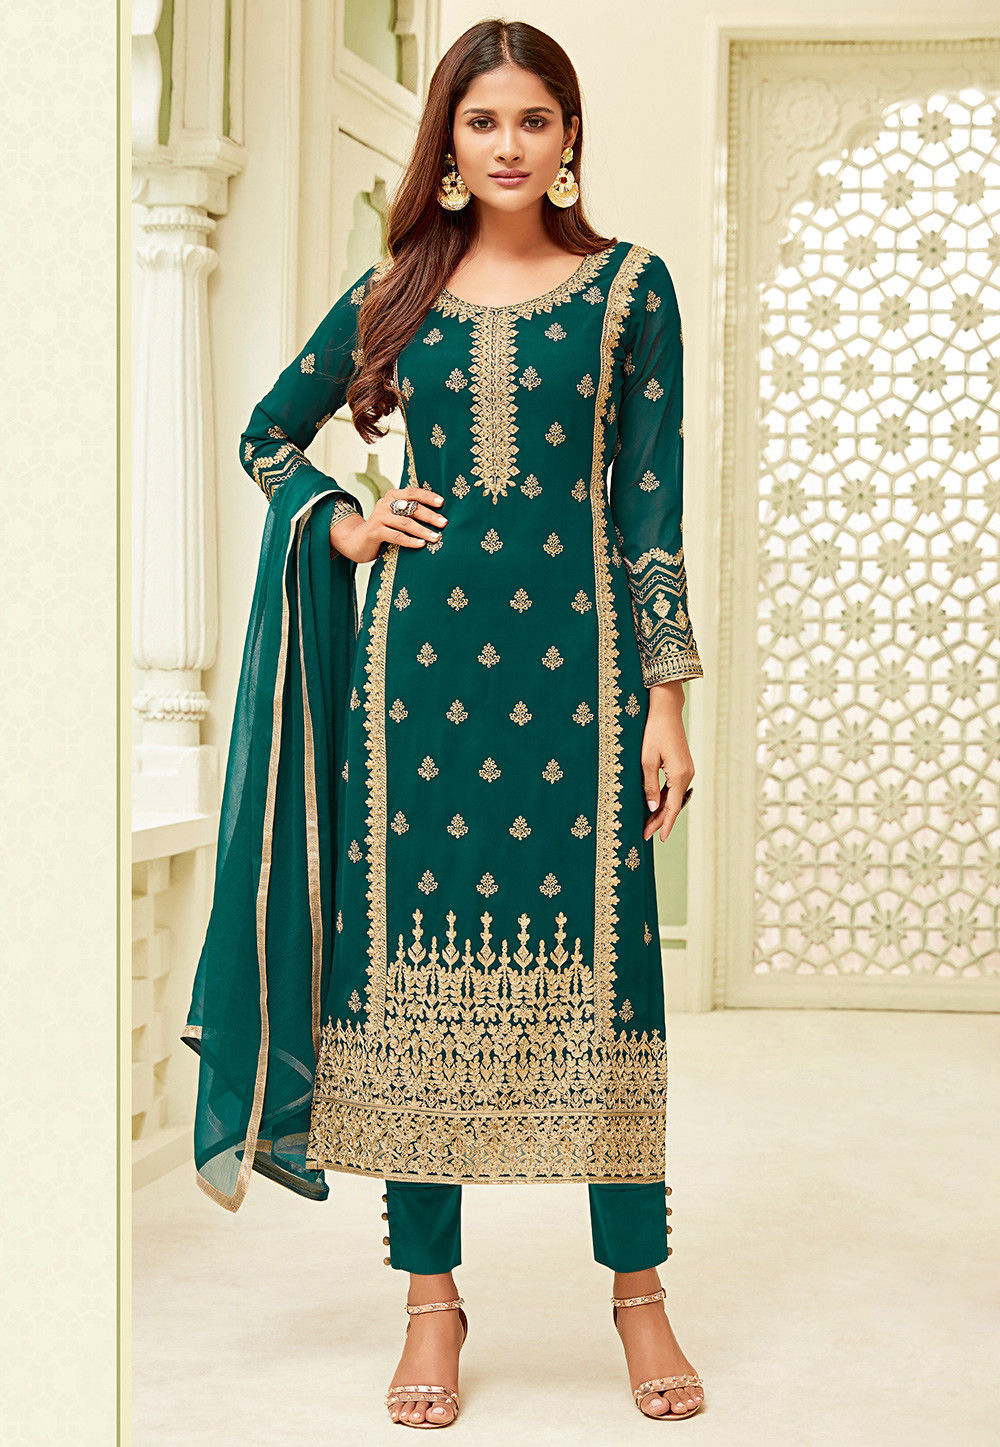 Embroidered Georgette Pakistani Suit in Teal Green : KCH2511